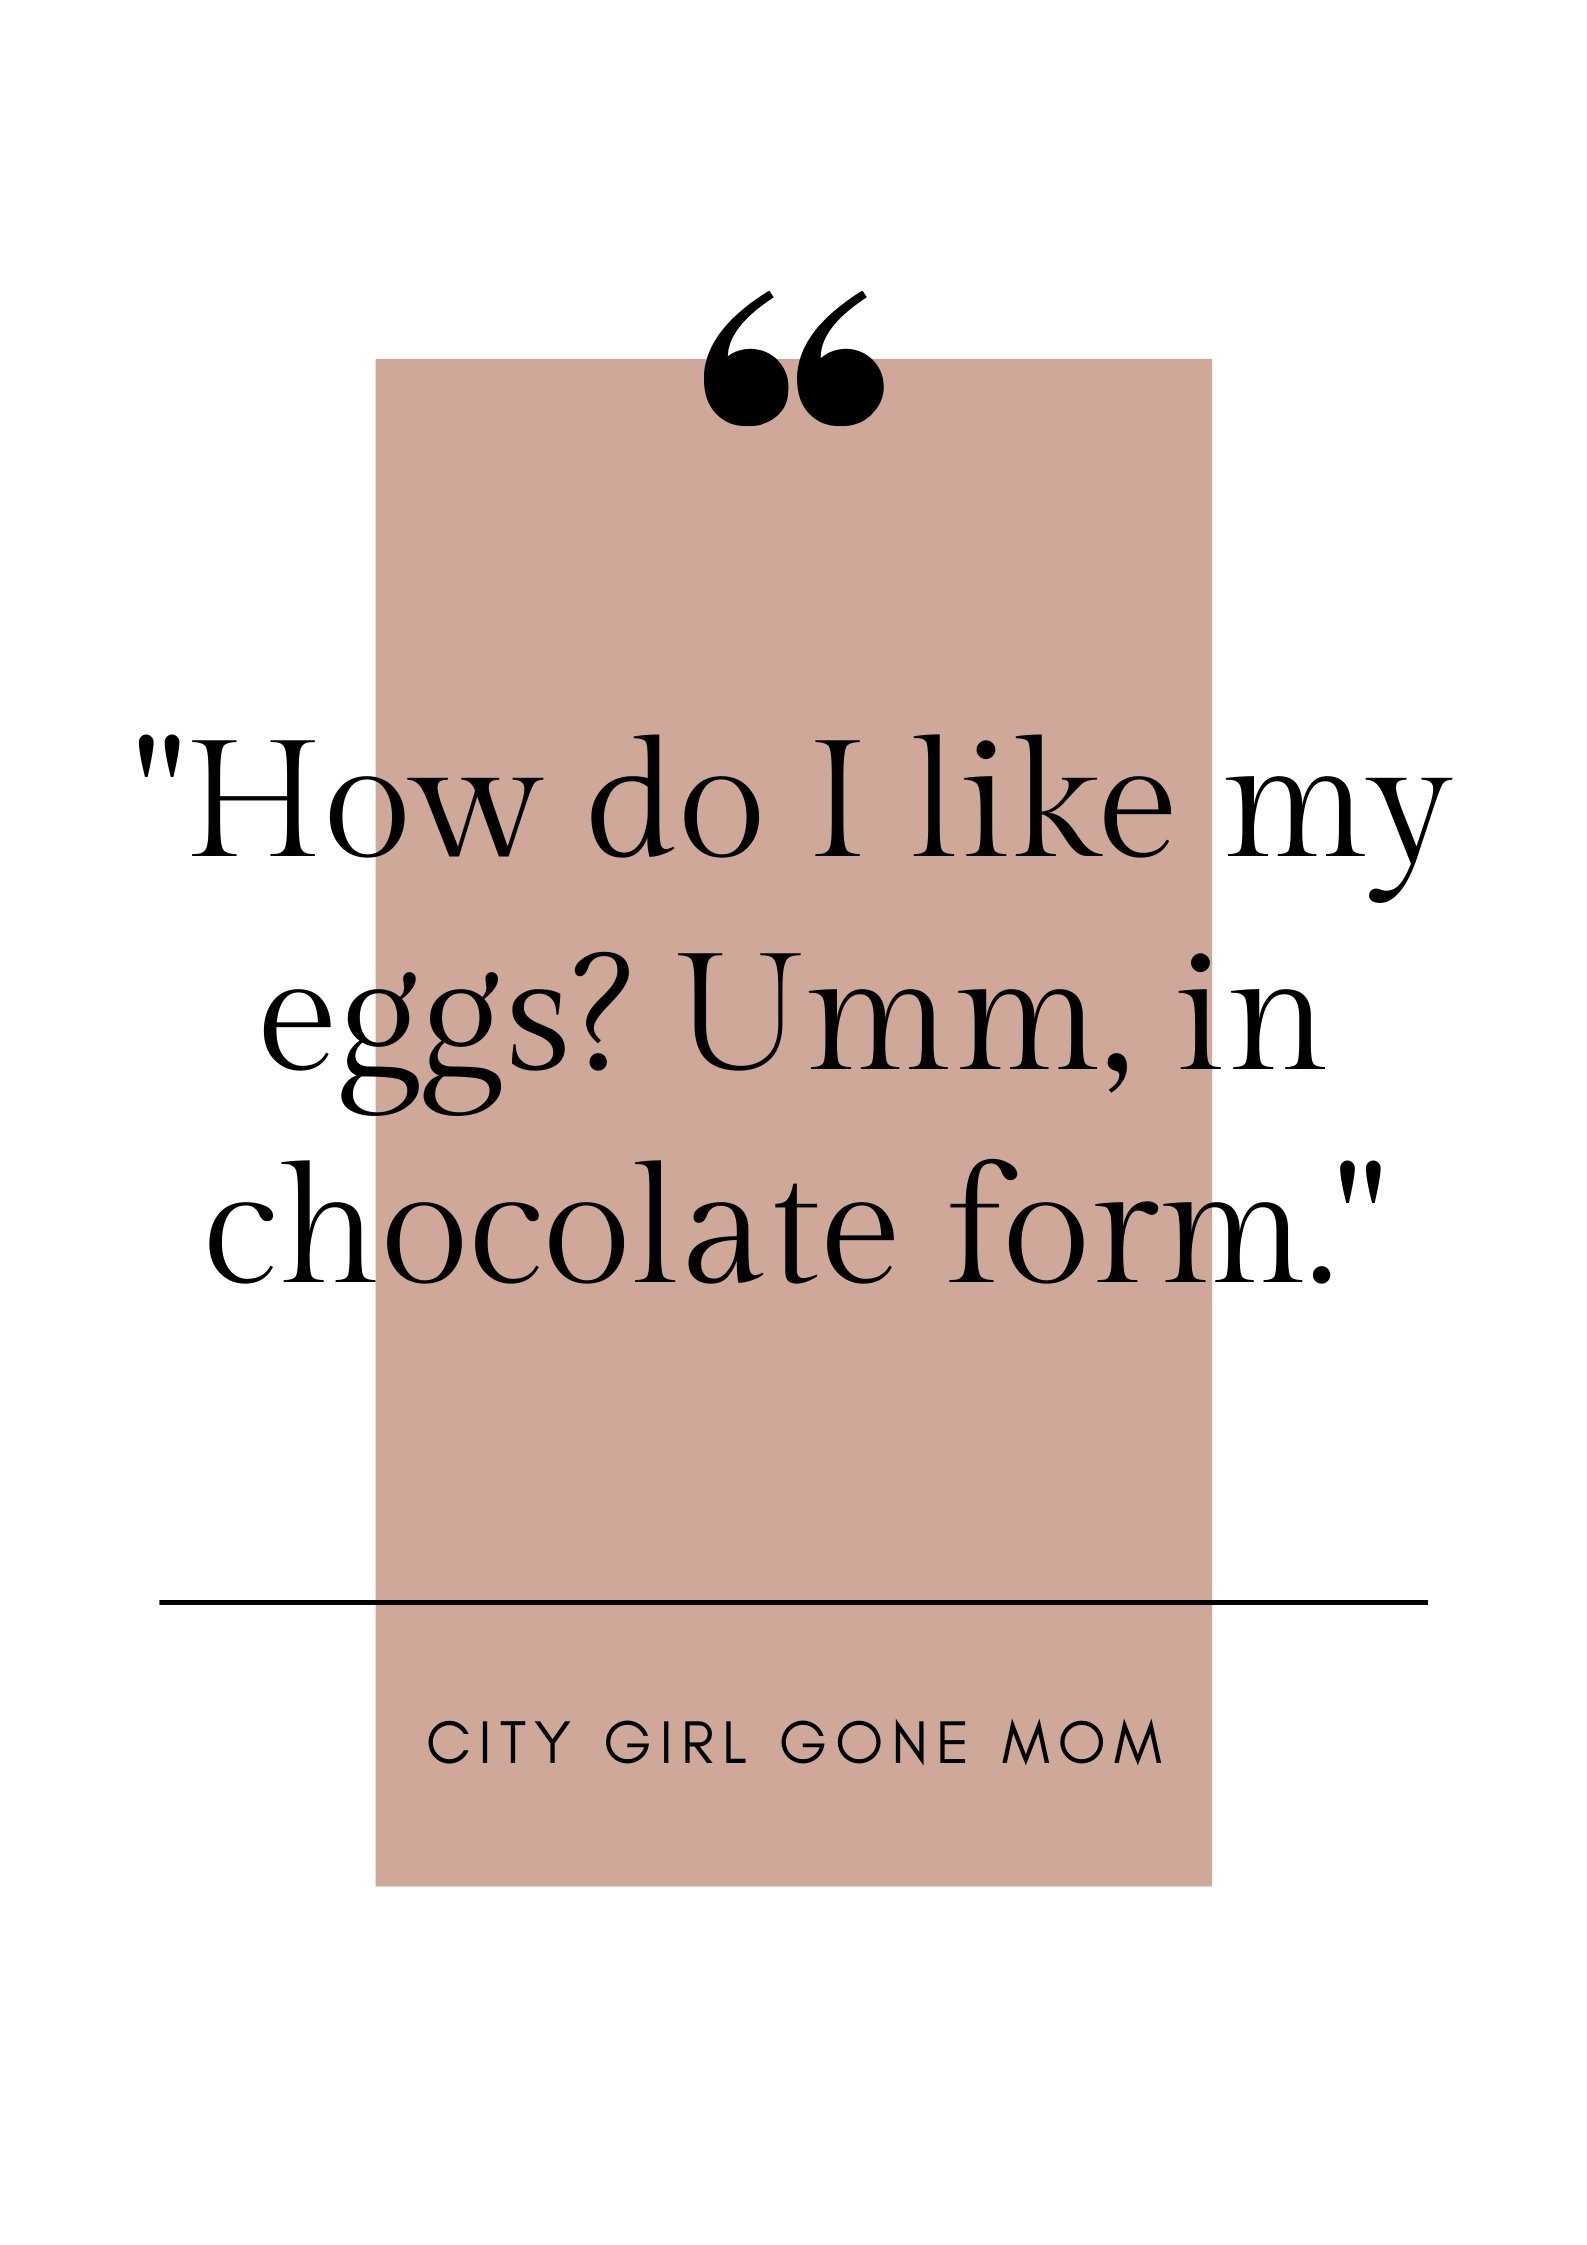 funny easter quote